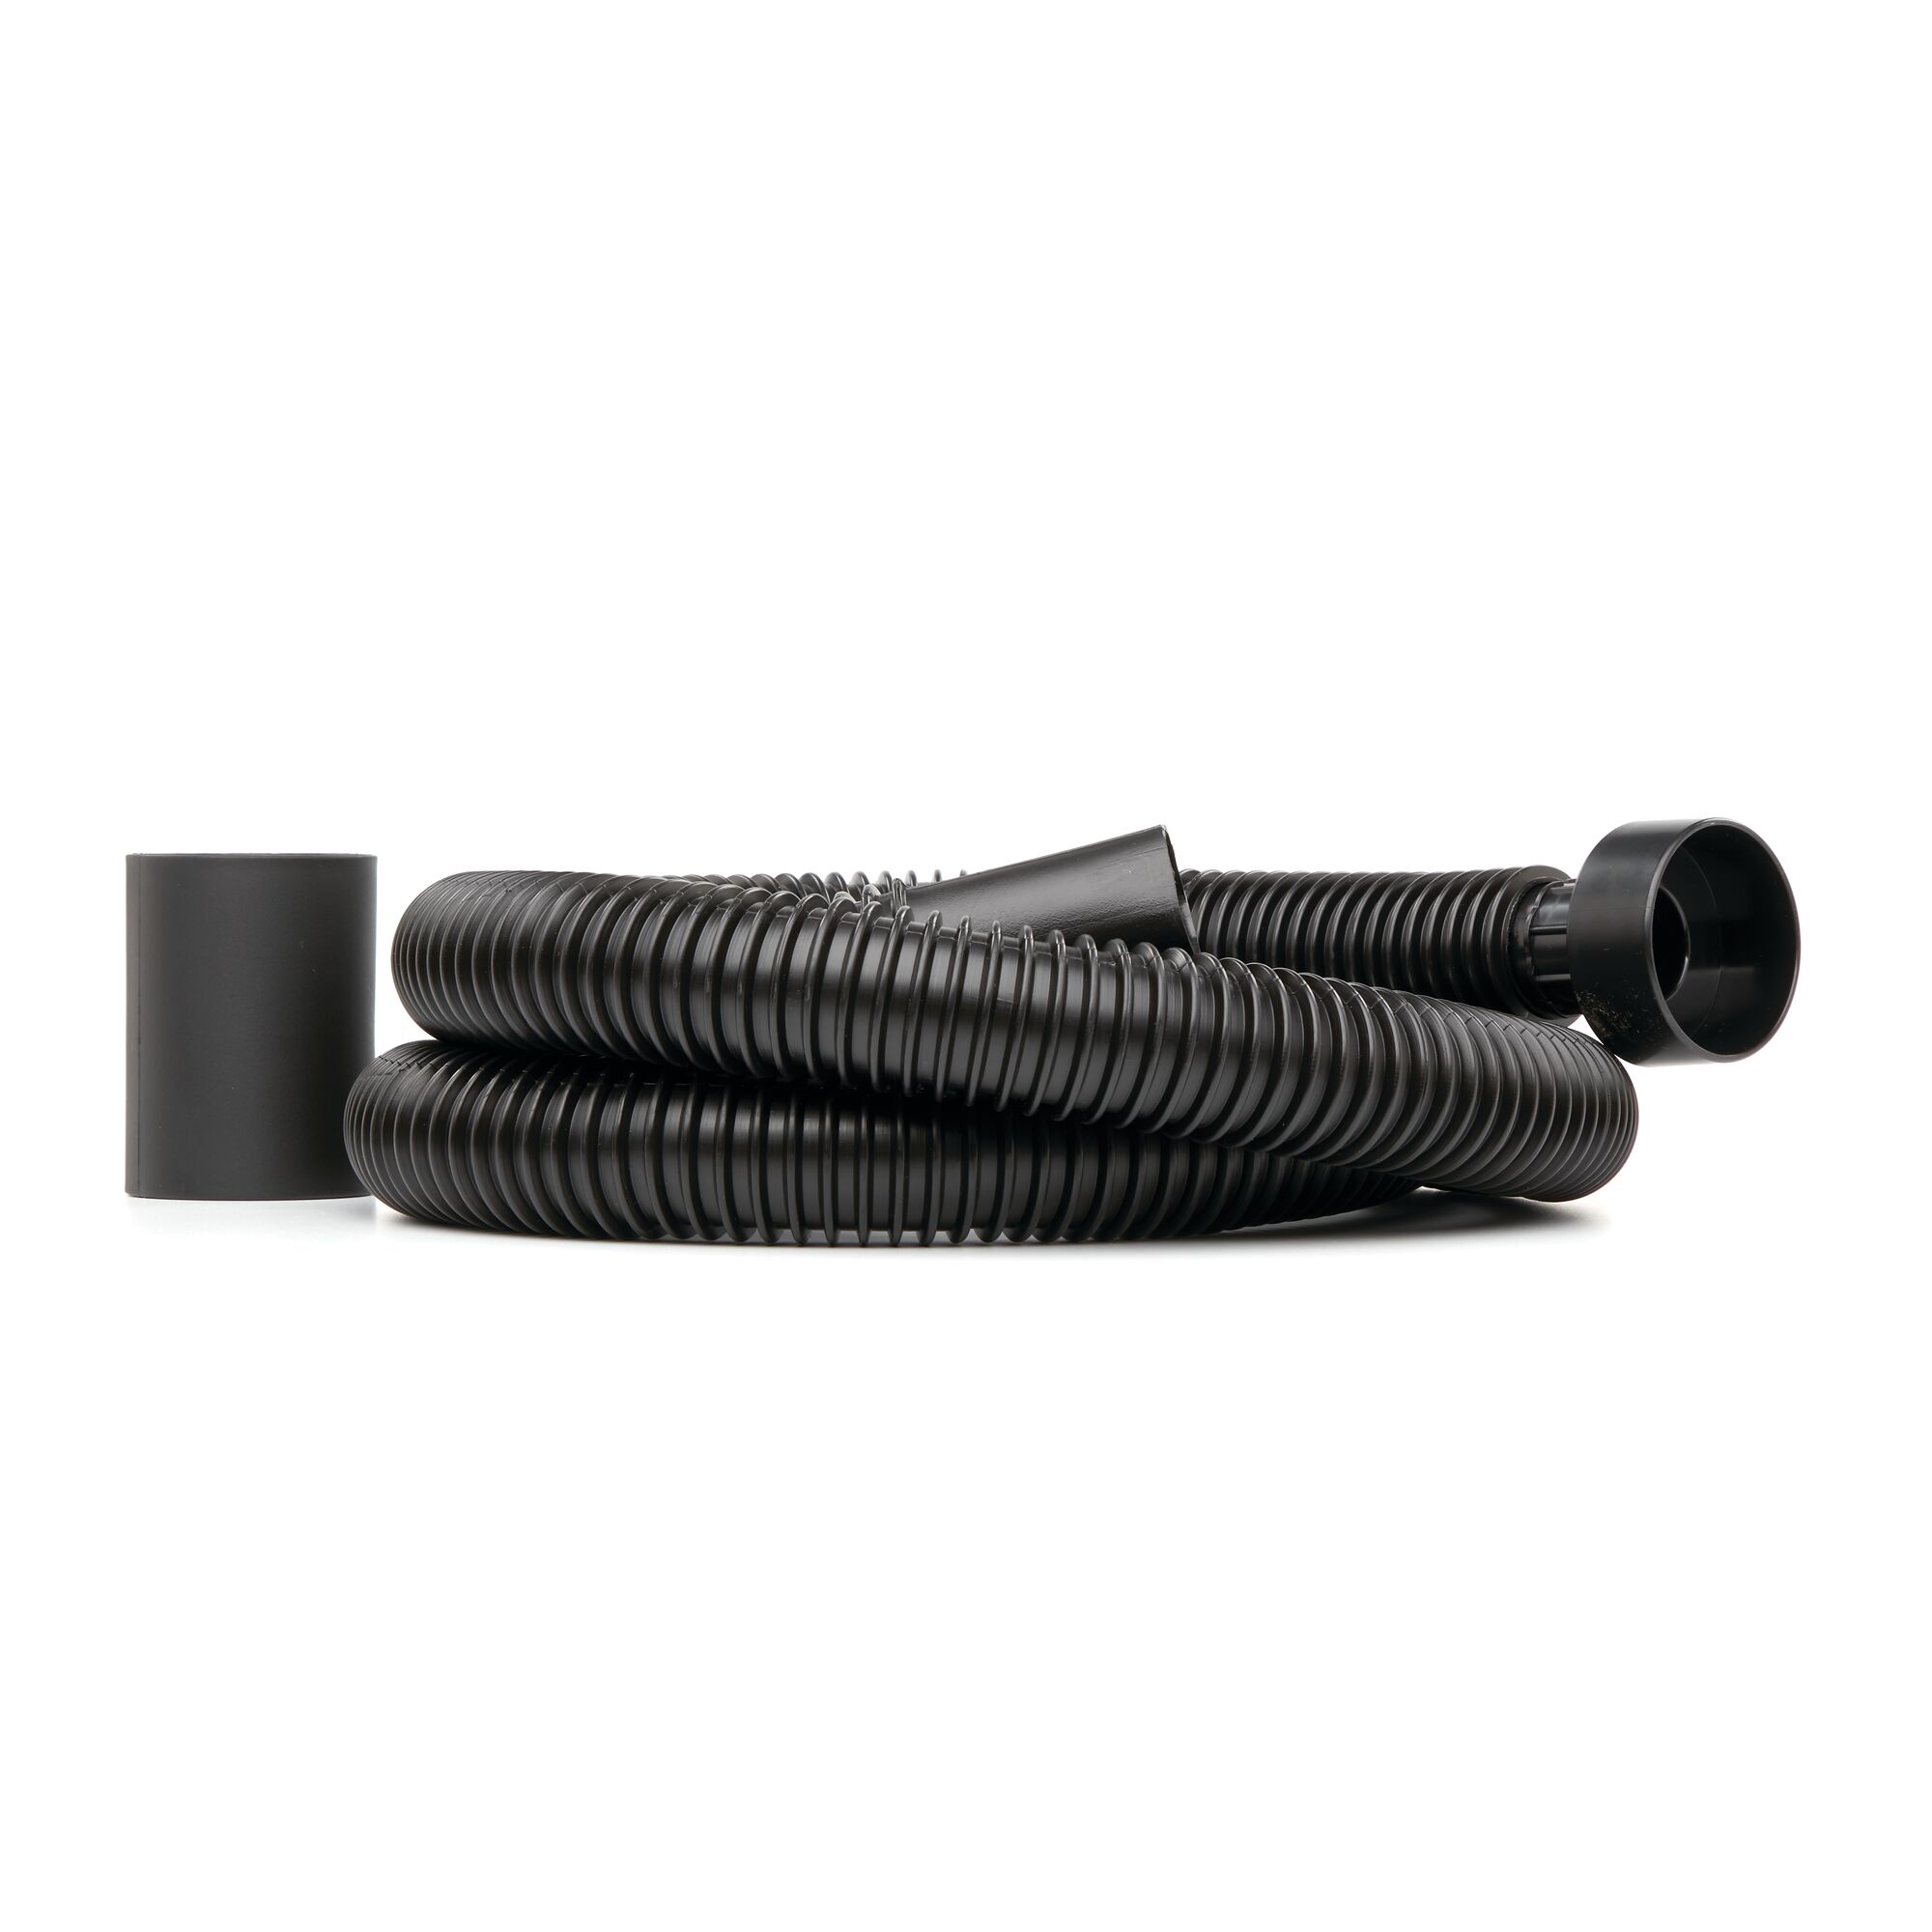 One and one quarter inch by 6 Foot Friction Fit Wet or Dry Vacuum Hose kit.